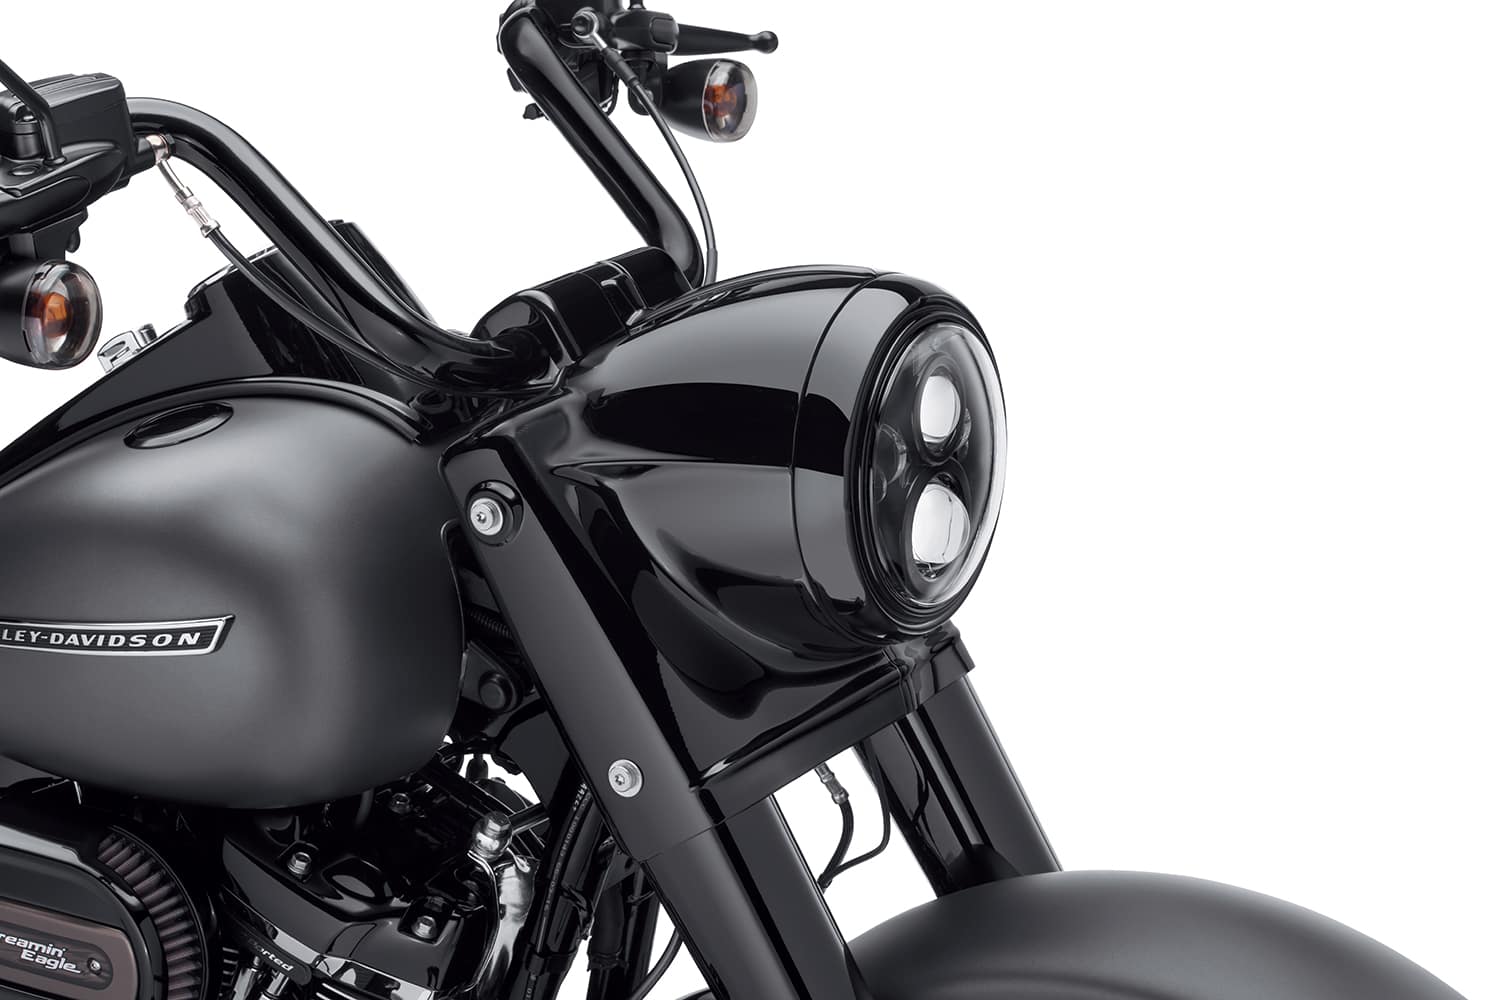 Customize Your Bike at a Harley Dealer in Las Vegas